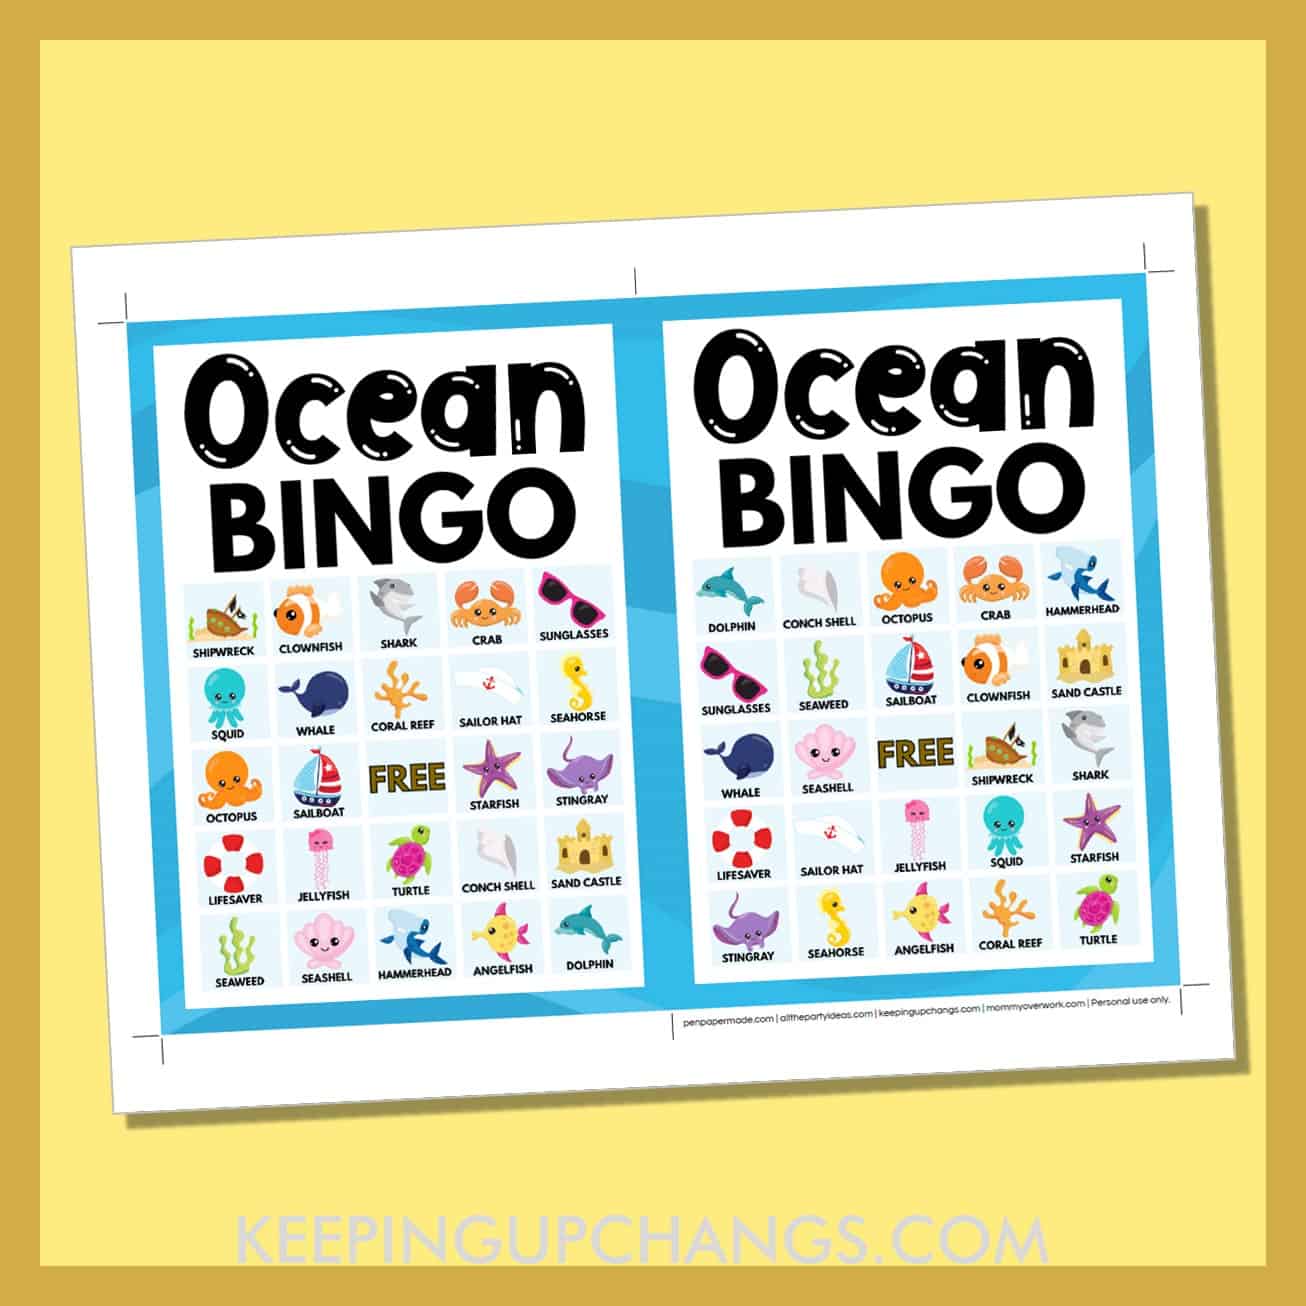 free ocean bingo card 5x5 5x7 game boards with images and text words.